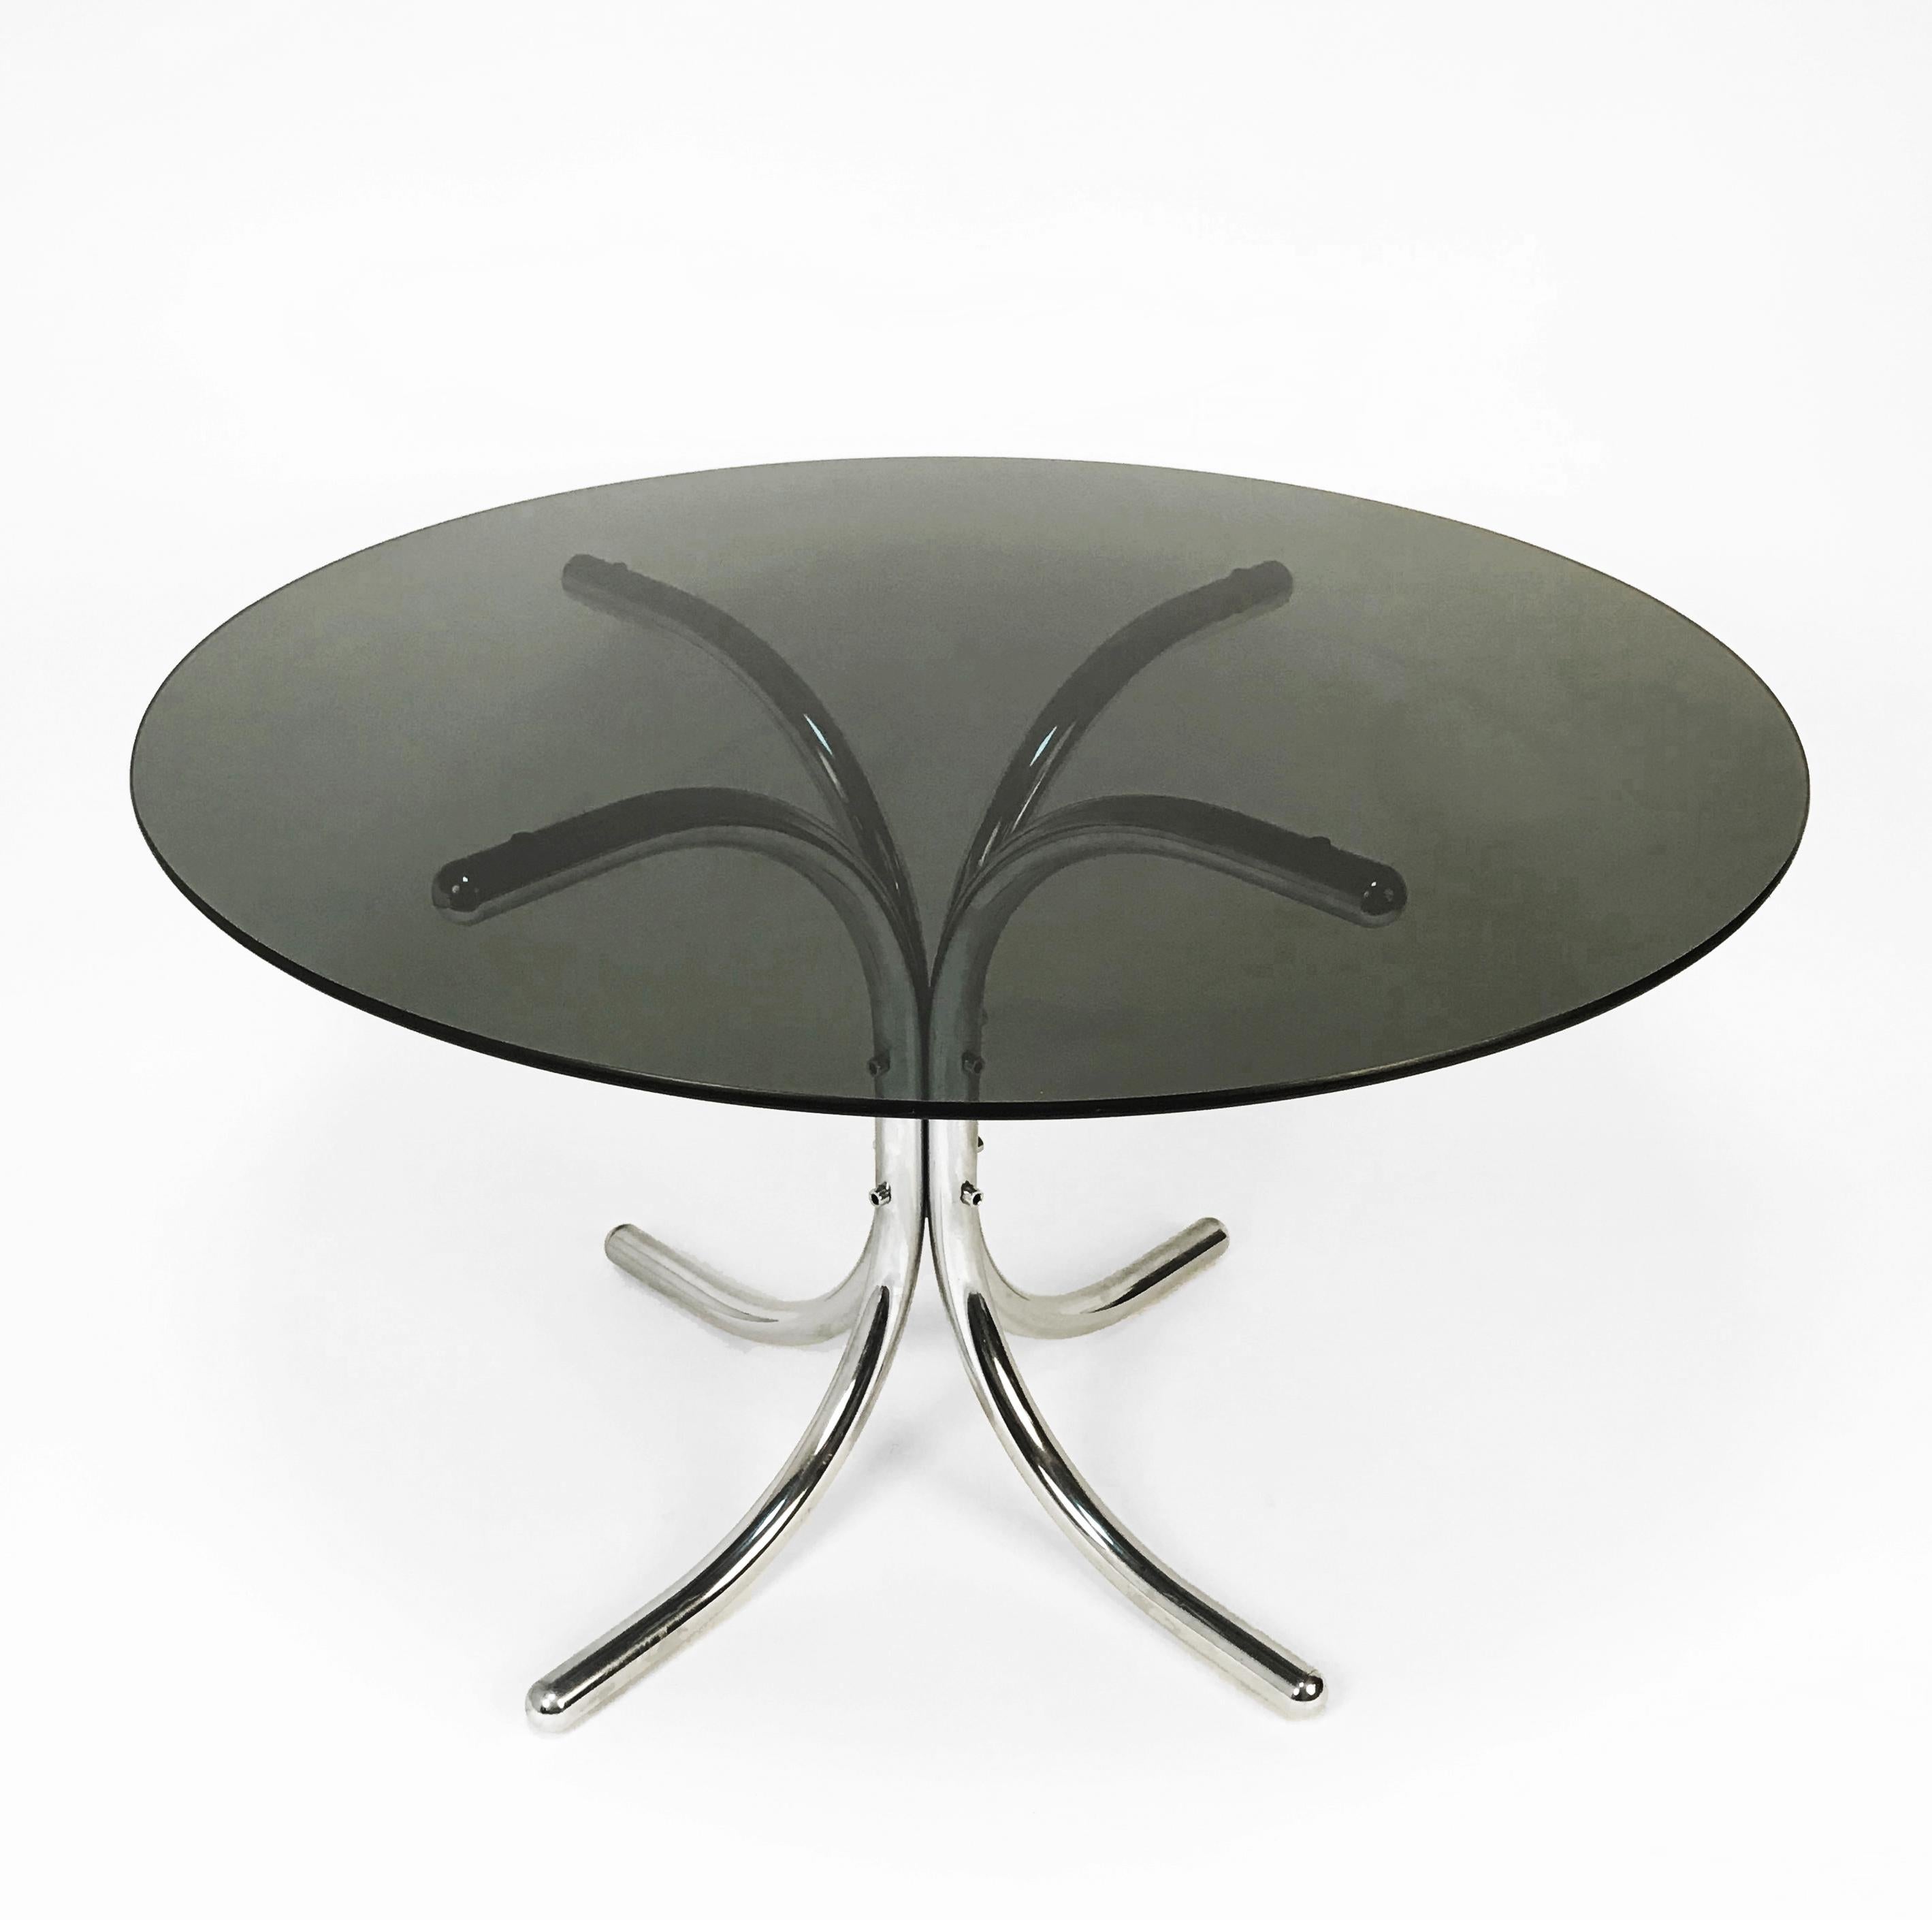 Italian dining table, Giotto Stoppino style. Chromed metal base, smoked glass top. Measure: Diameter 120 cm.